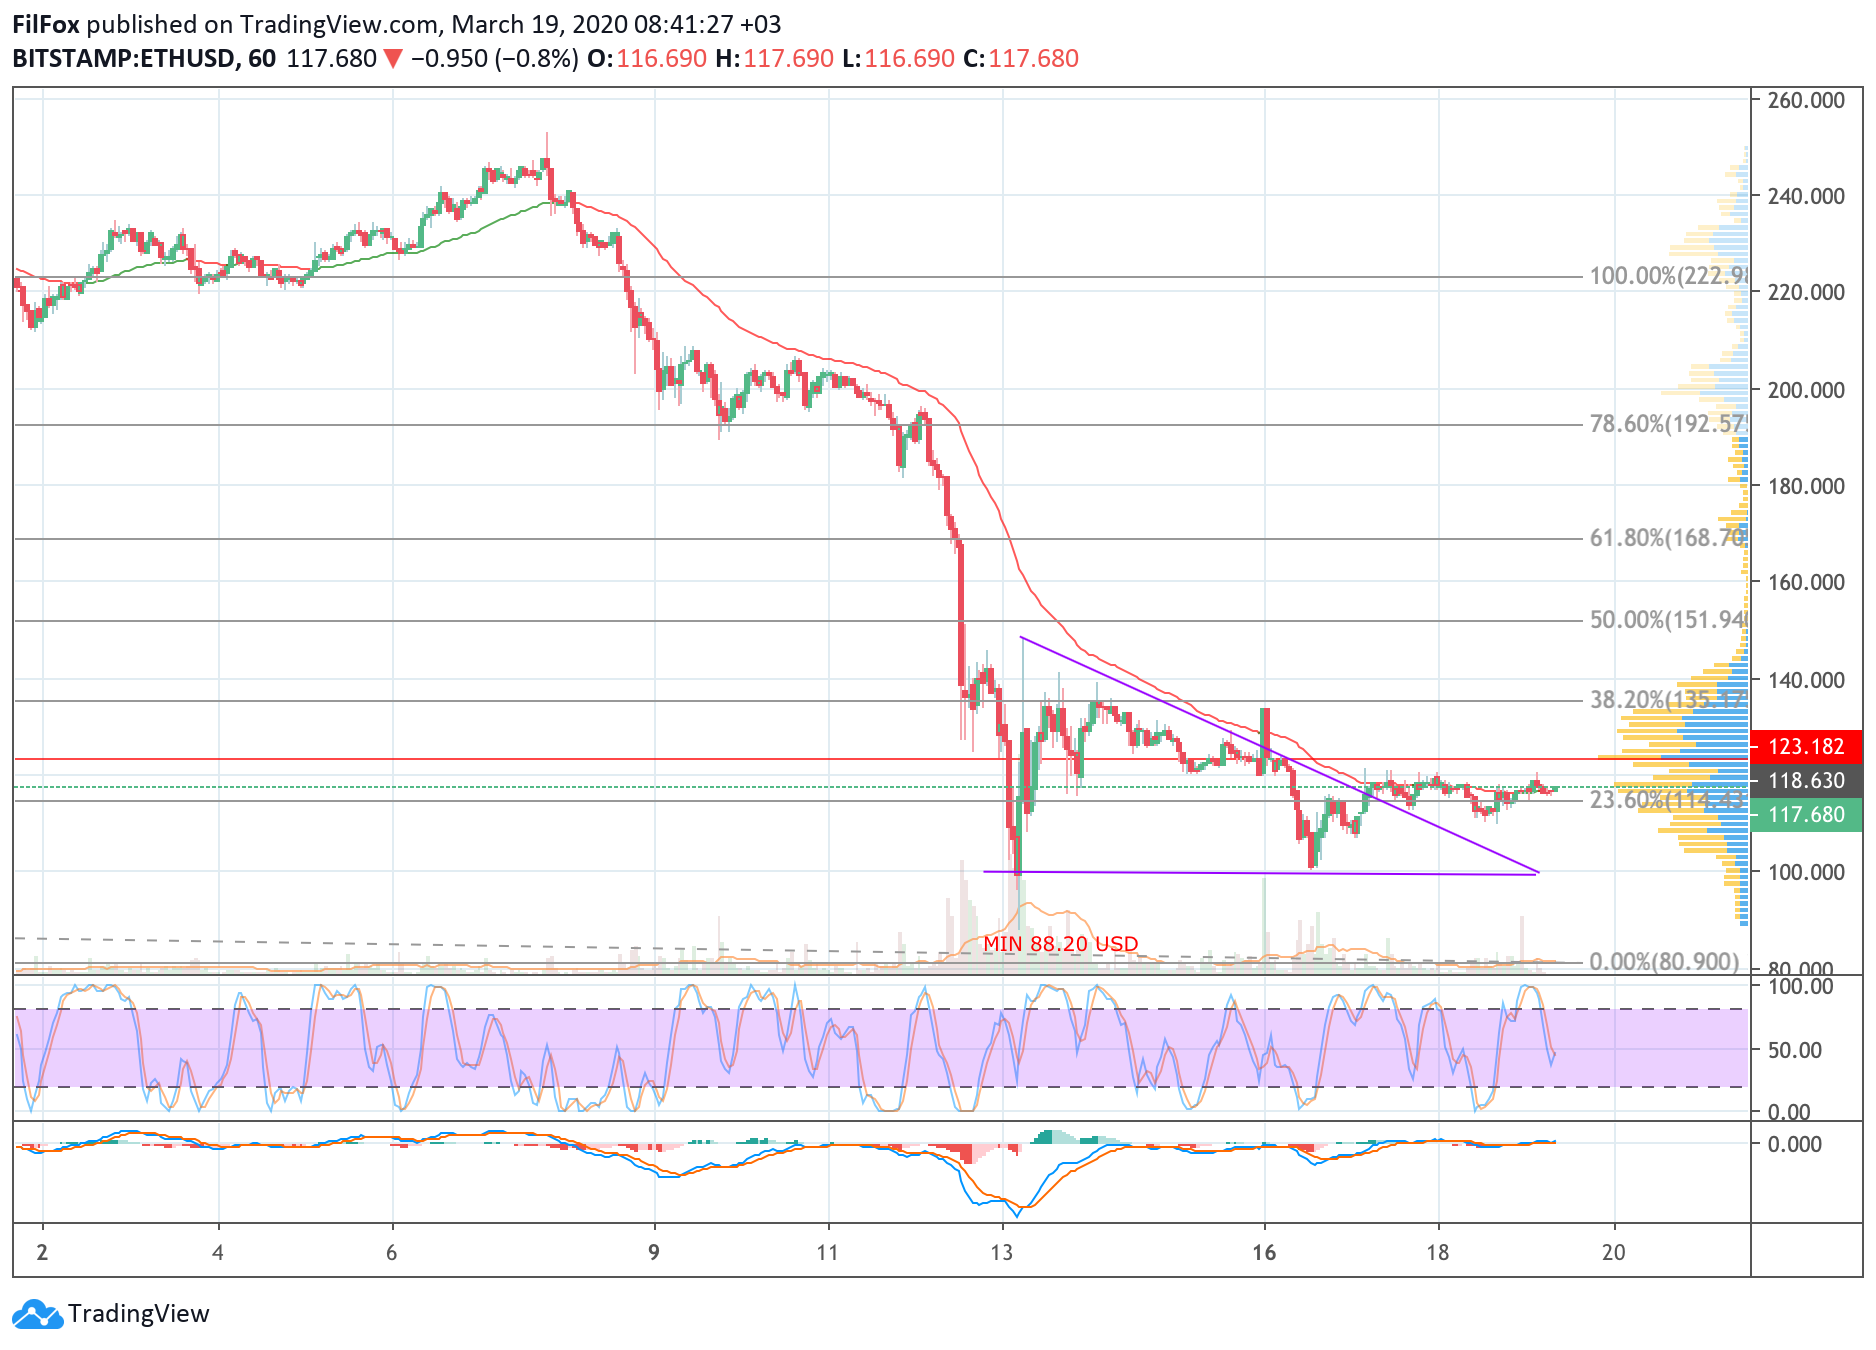 Analysis of cryptocurrency pairs BTC / USD, ETH / USD and XRP / USD on 03/19/2020